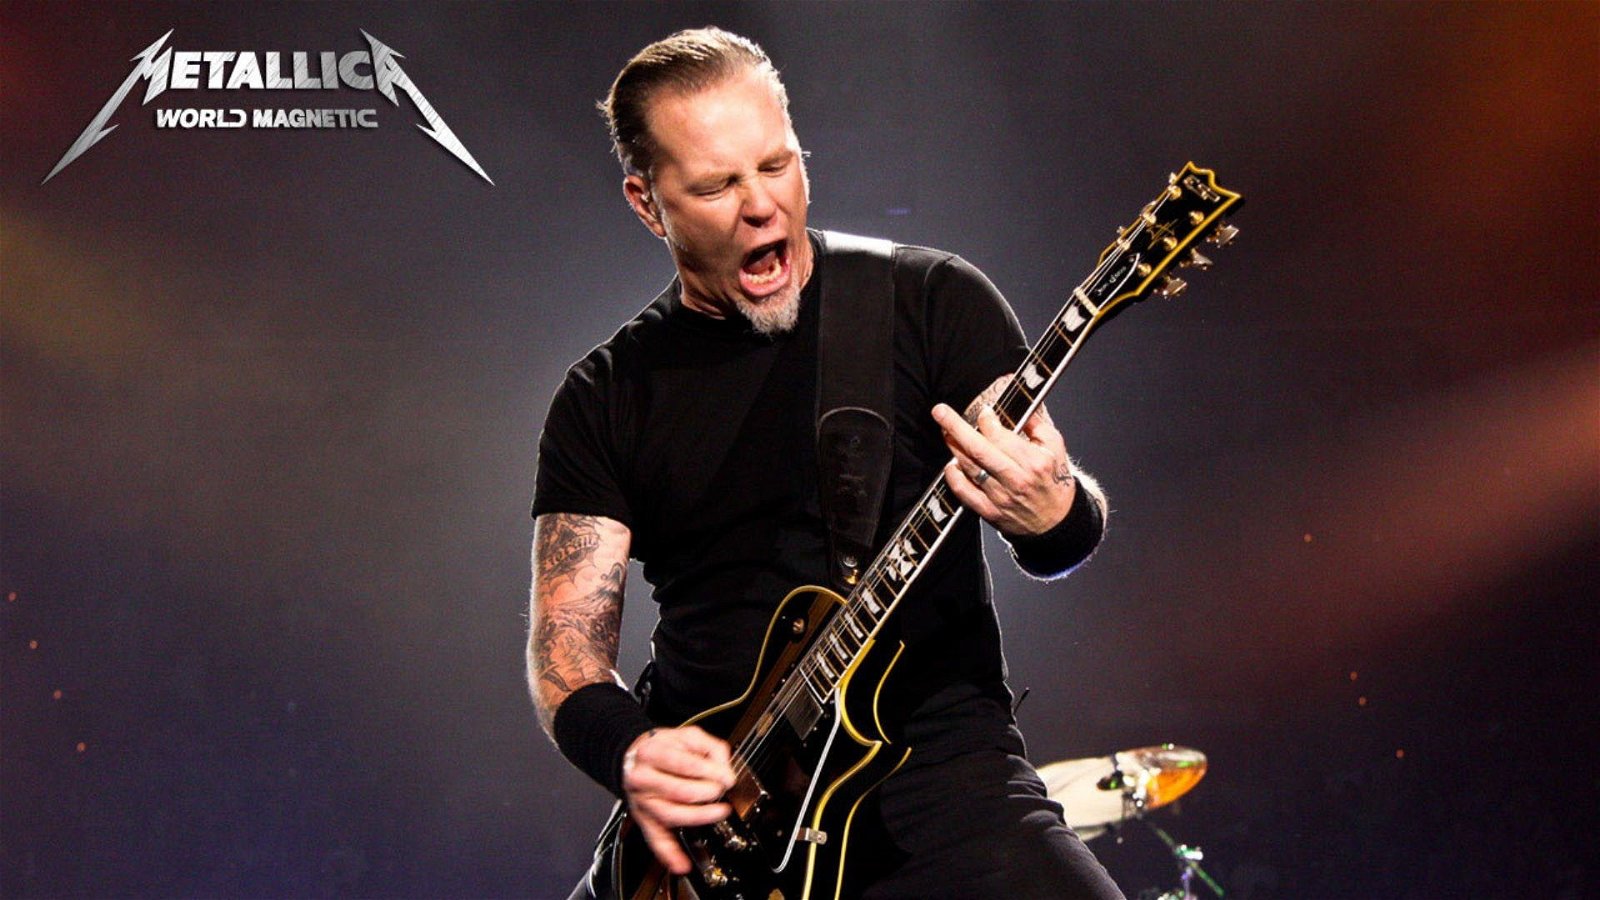 How old is the lead singer of Metallica